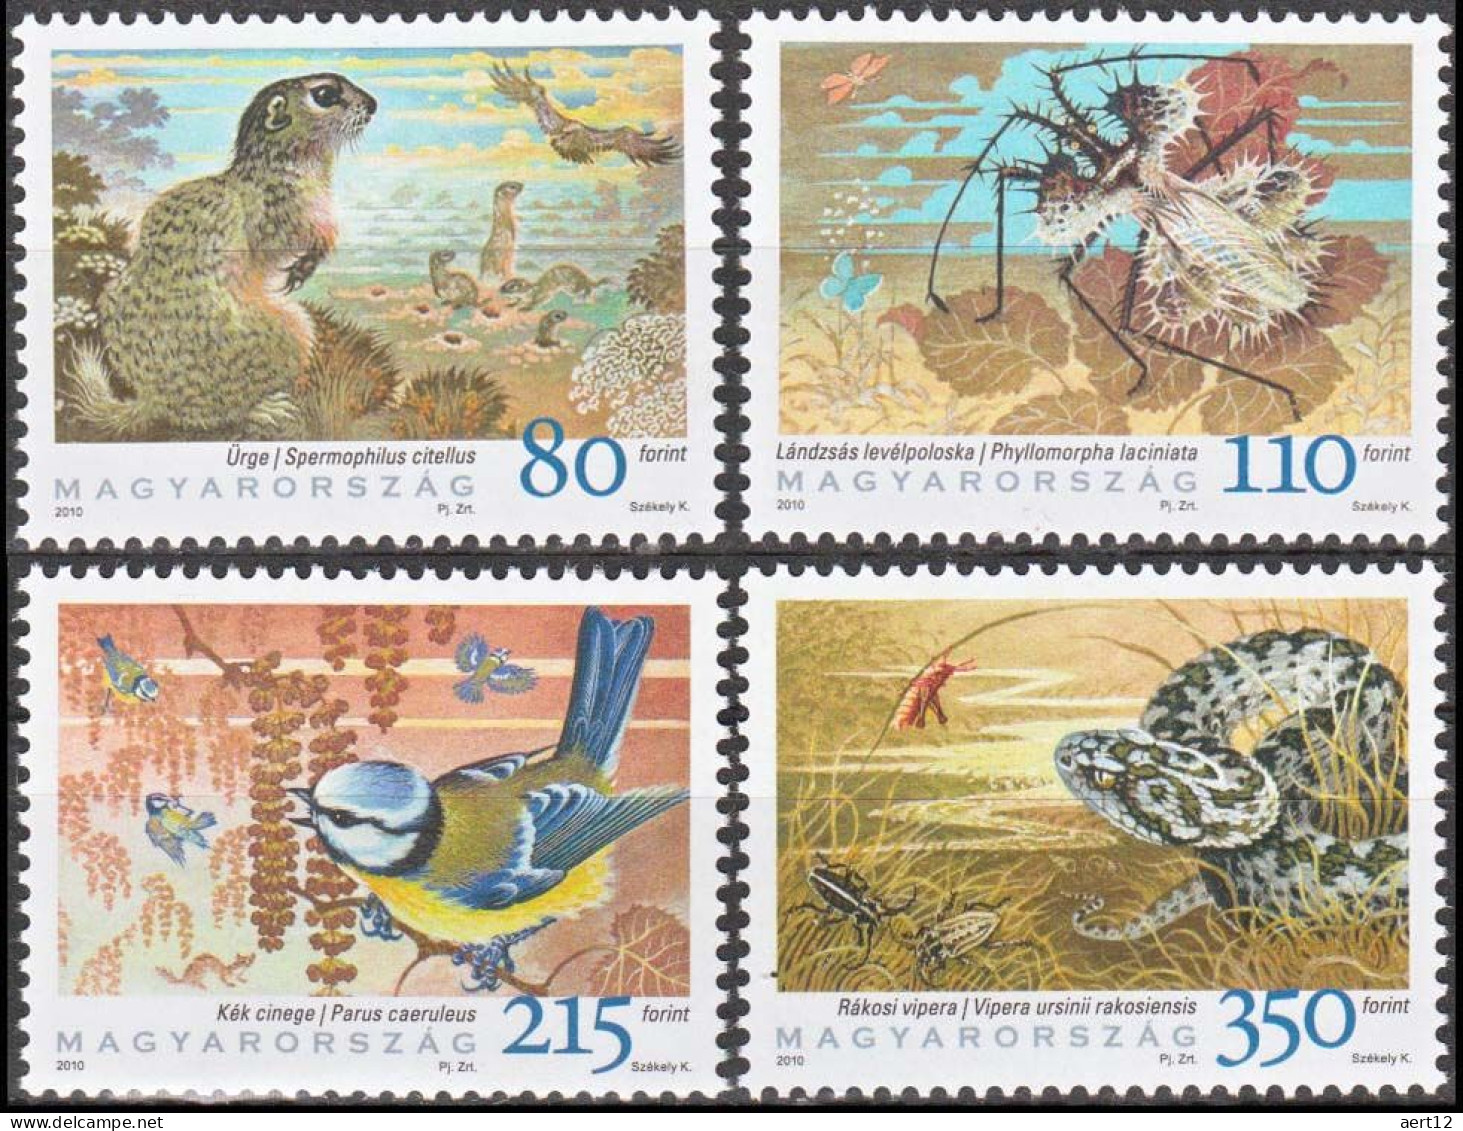 2010, Hungary, Biodiversity, Birds, Insects, Rodents, Snakes, Squirrels, 4 Stamps, MNH(**), HU 5473-76 - Slangen